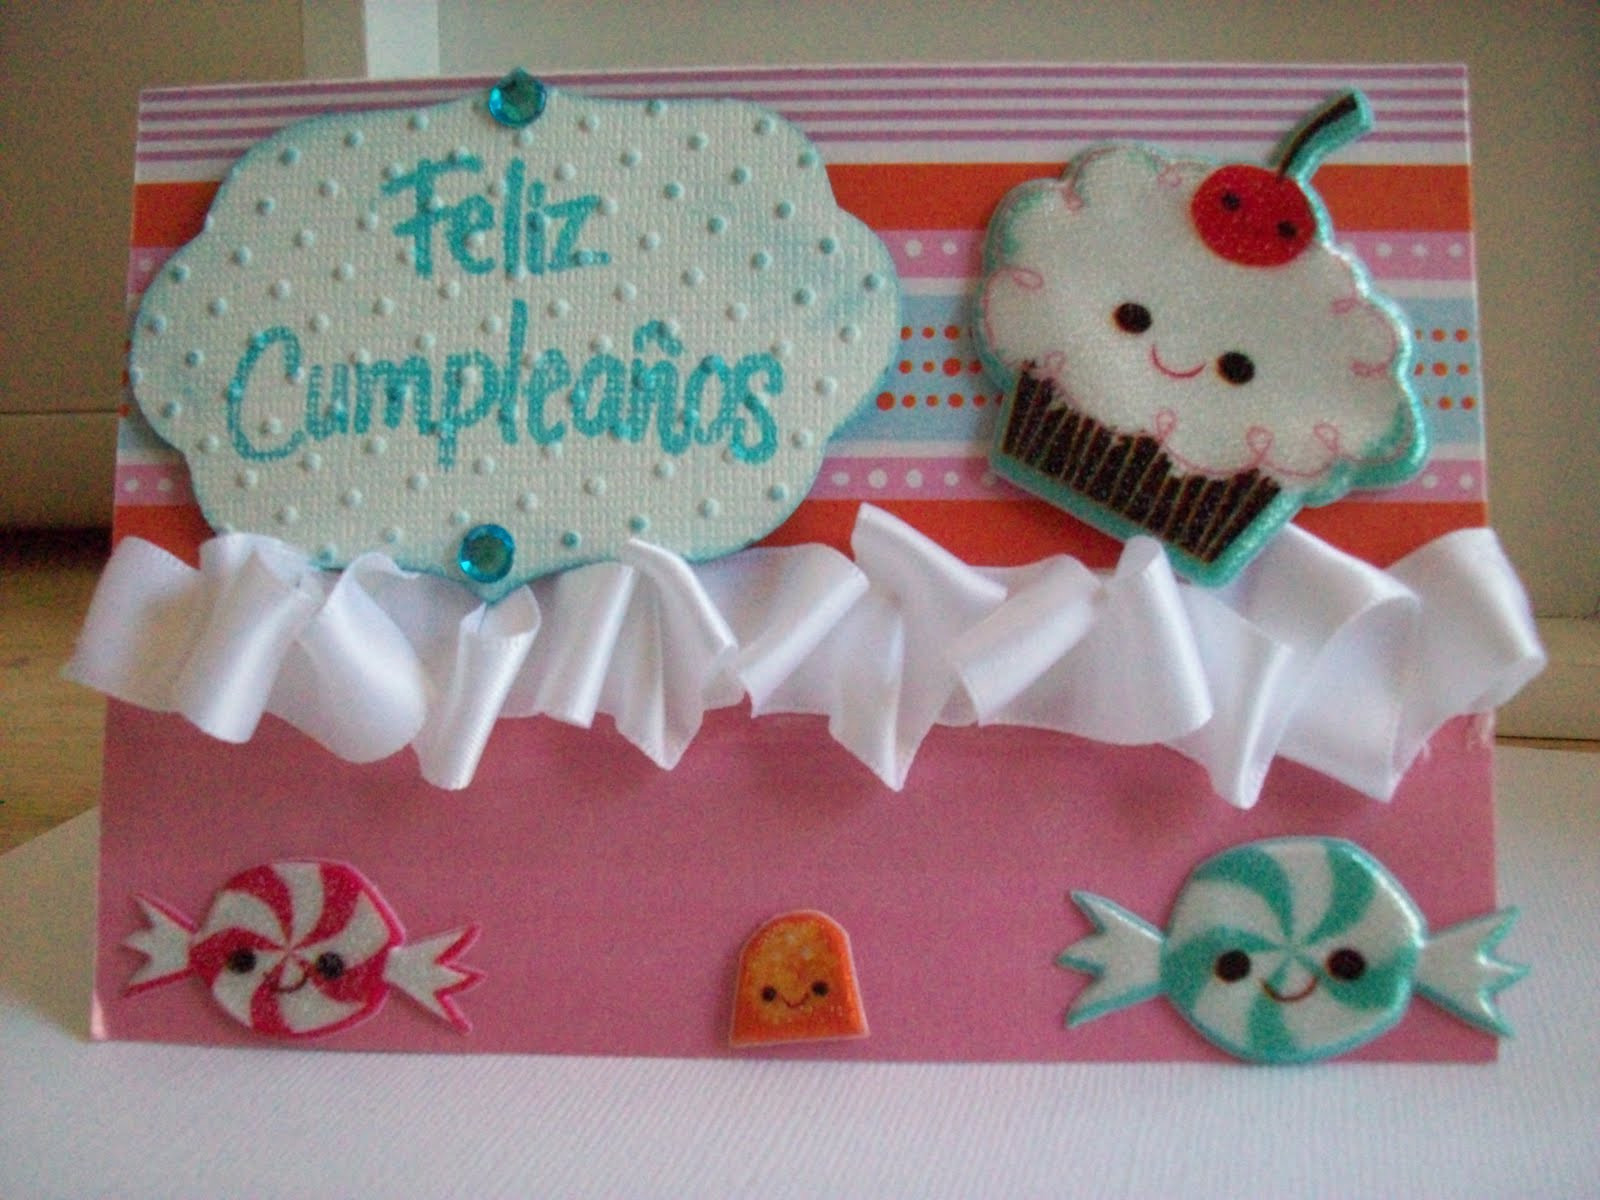 Happy Birthday Wishes In Spanish
 How to Say Wishes for Happy Birthday in Spanish Song